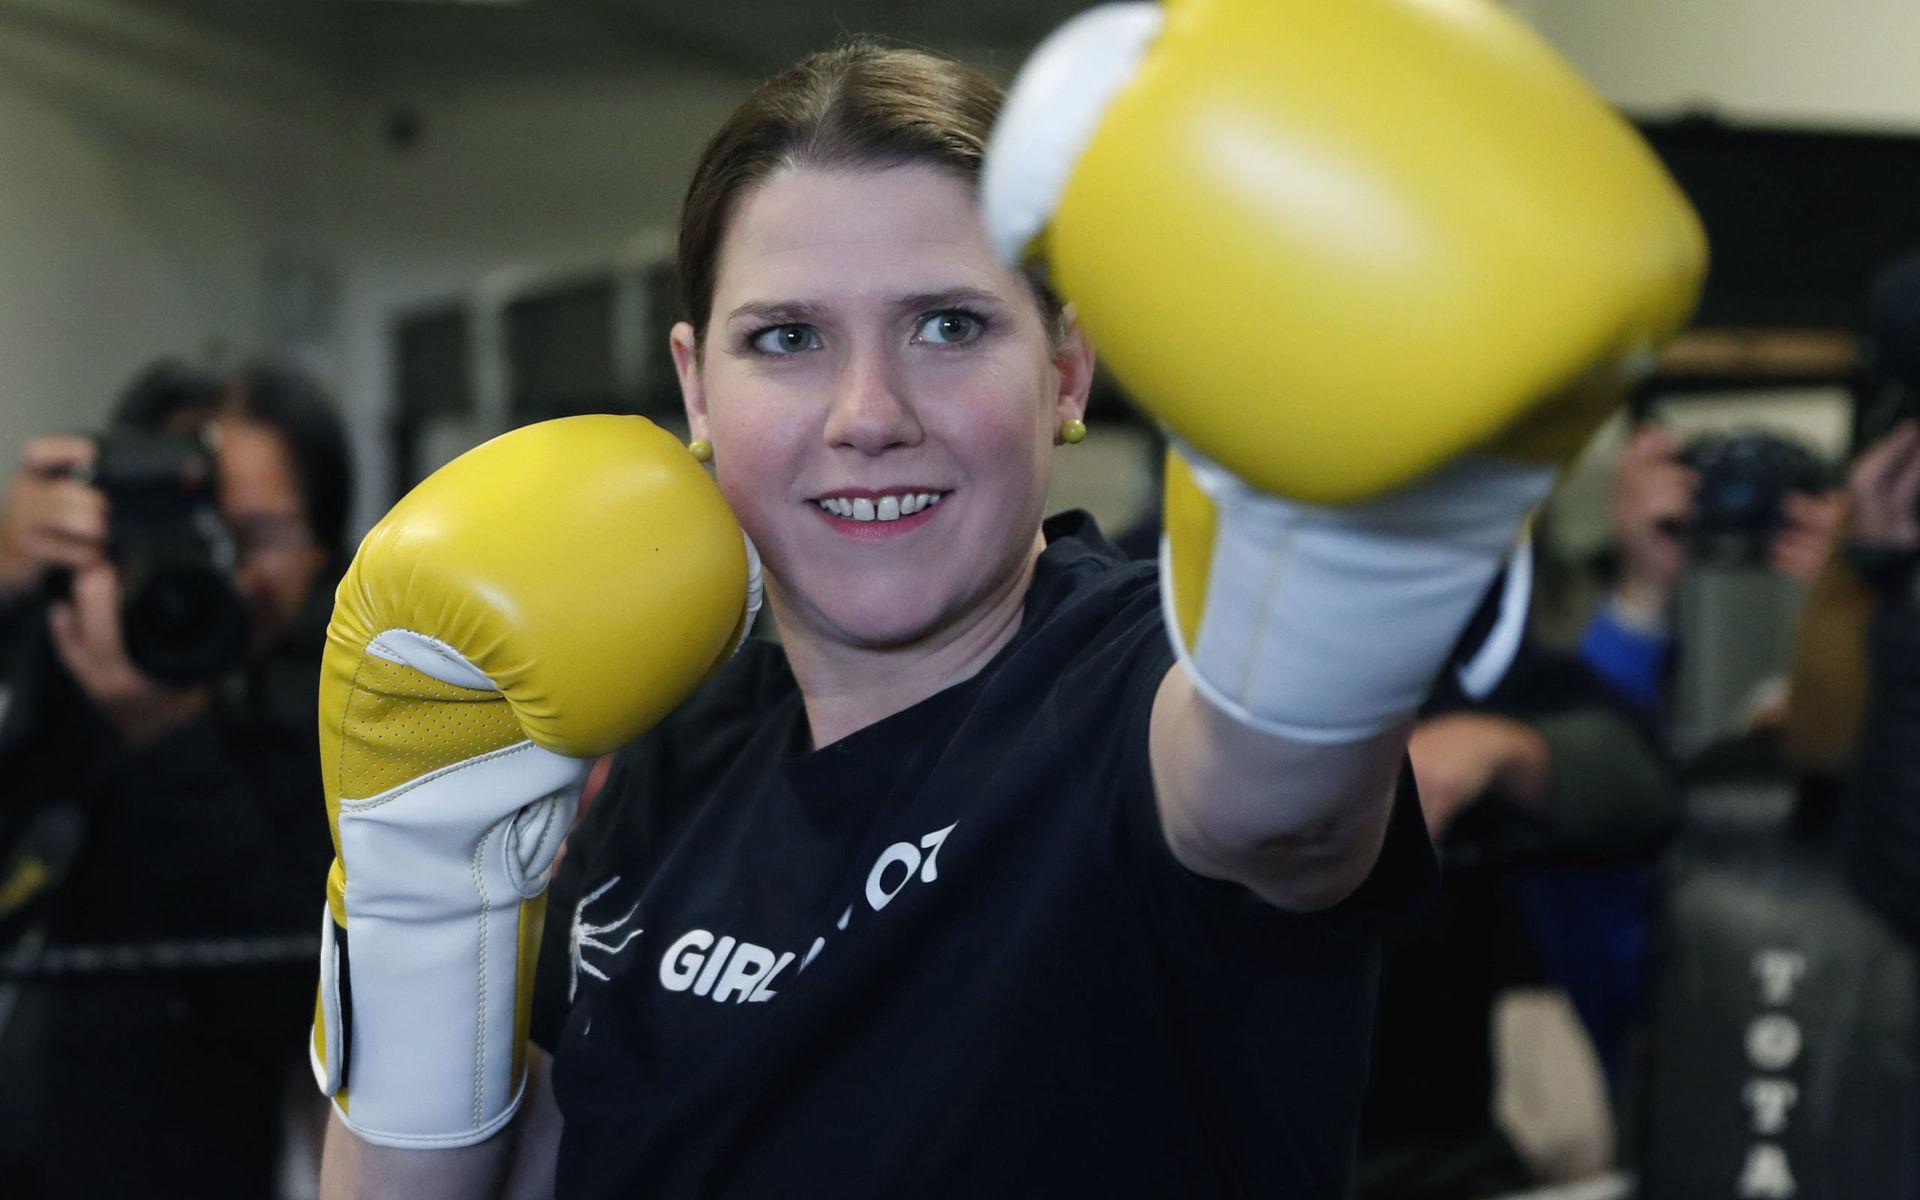 Liberal Democrats leader Jo Swinson visits the boxing gym Total Boxer, which offers training to young people as a means of keeping them away from violence during the General Election campaign trail, in London, Wednesday, Nov. 13, 2019. Britain goes to the polls on Dec. 12.  (AP Photo/Alastair Grant)  XAG103